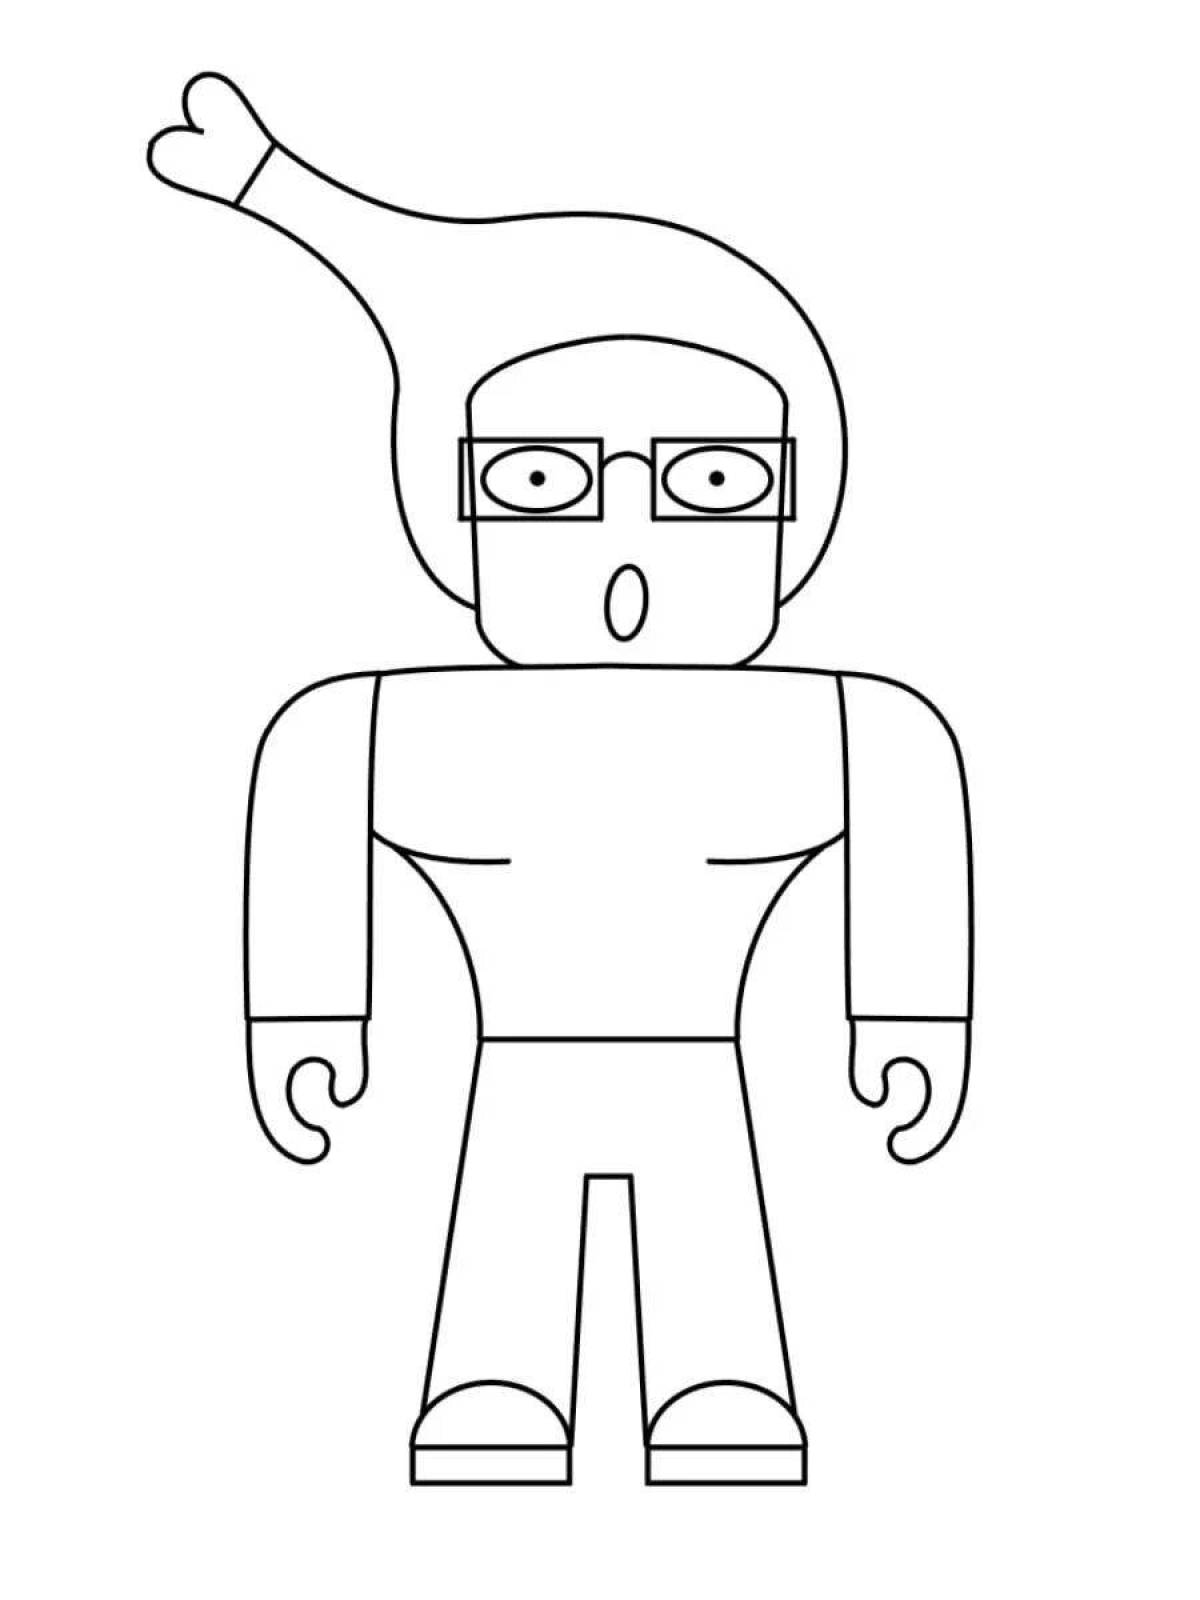 Fun roblox heroes coloring page